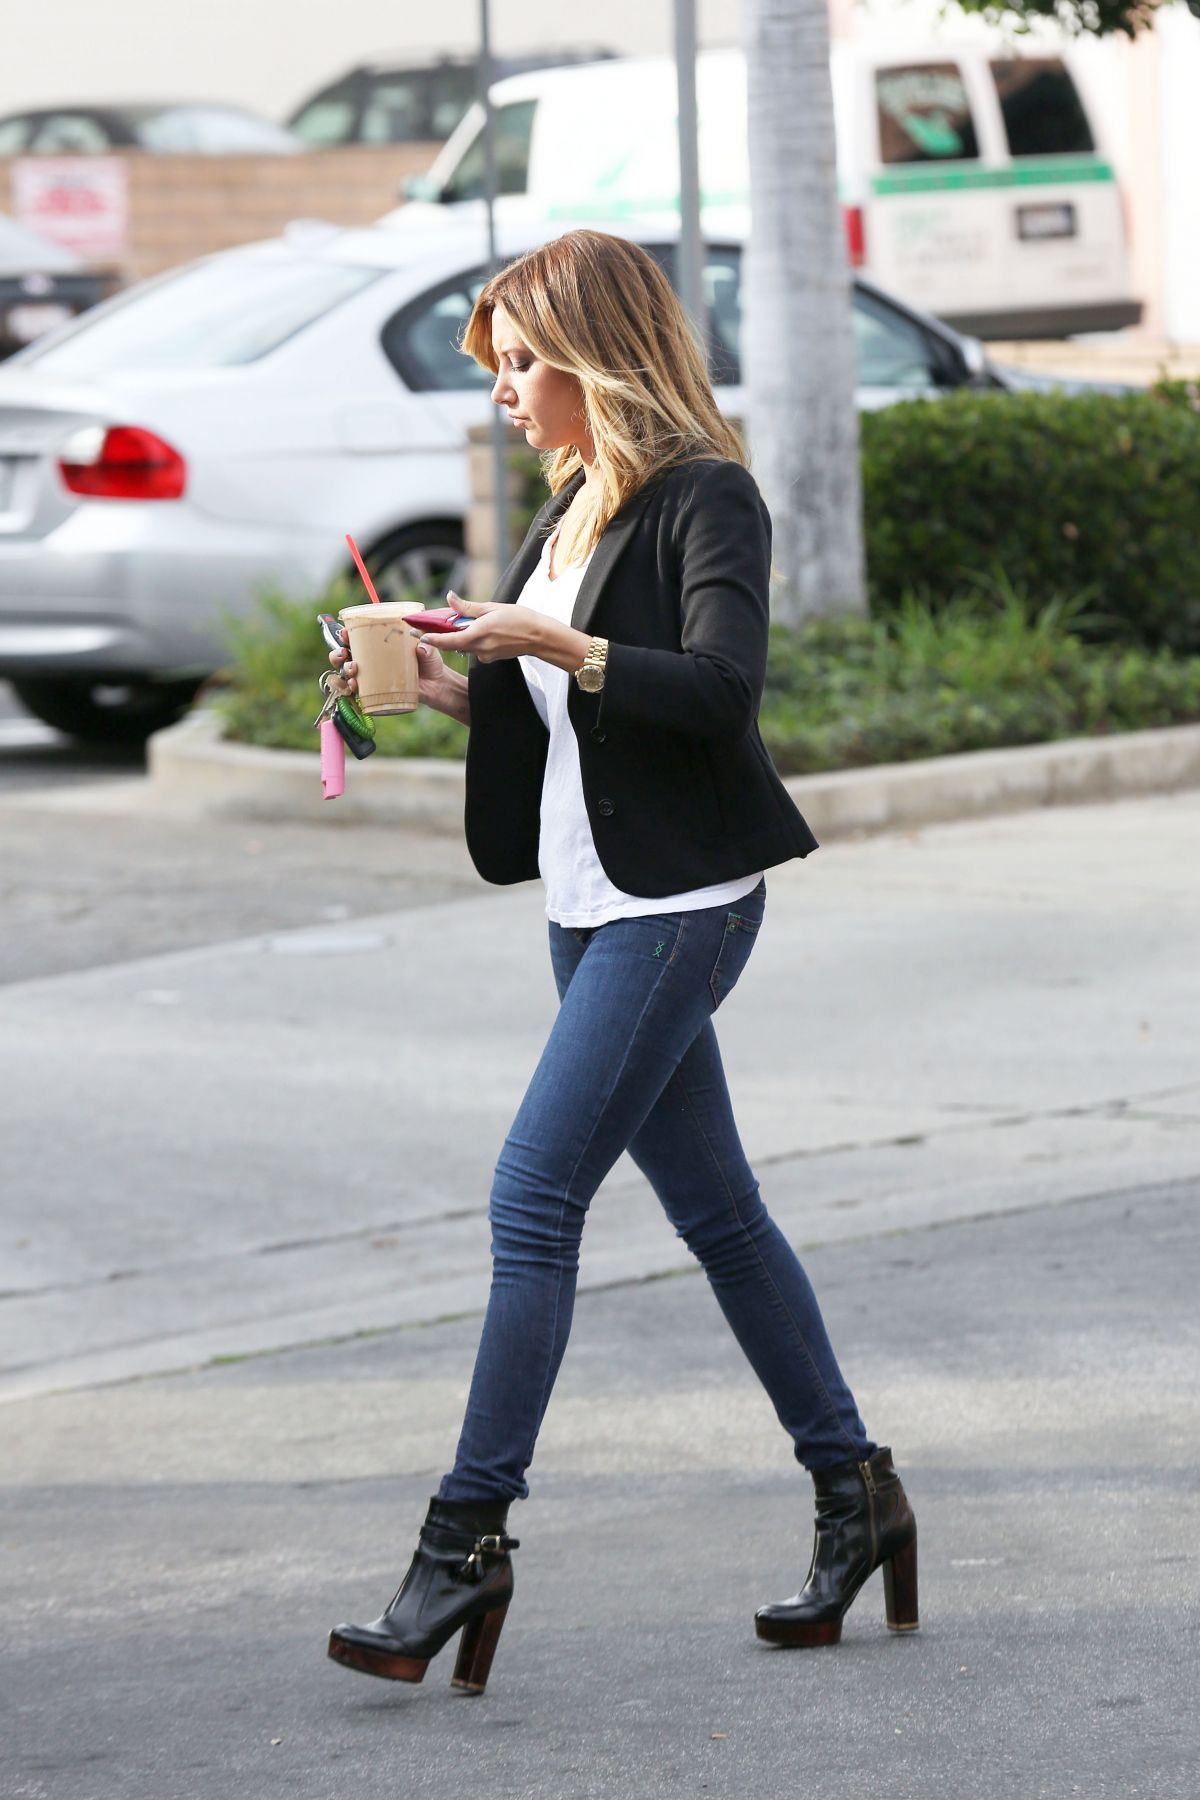 ASHLEY TISDALE in Tight Jeans Out in Los Angeles - HawtCelebs